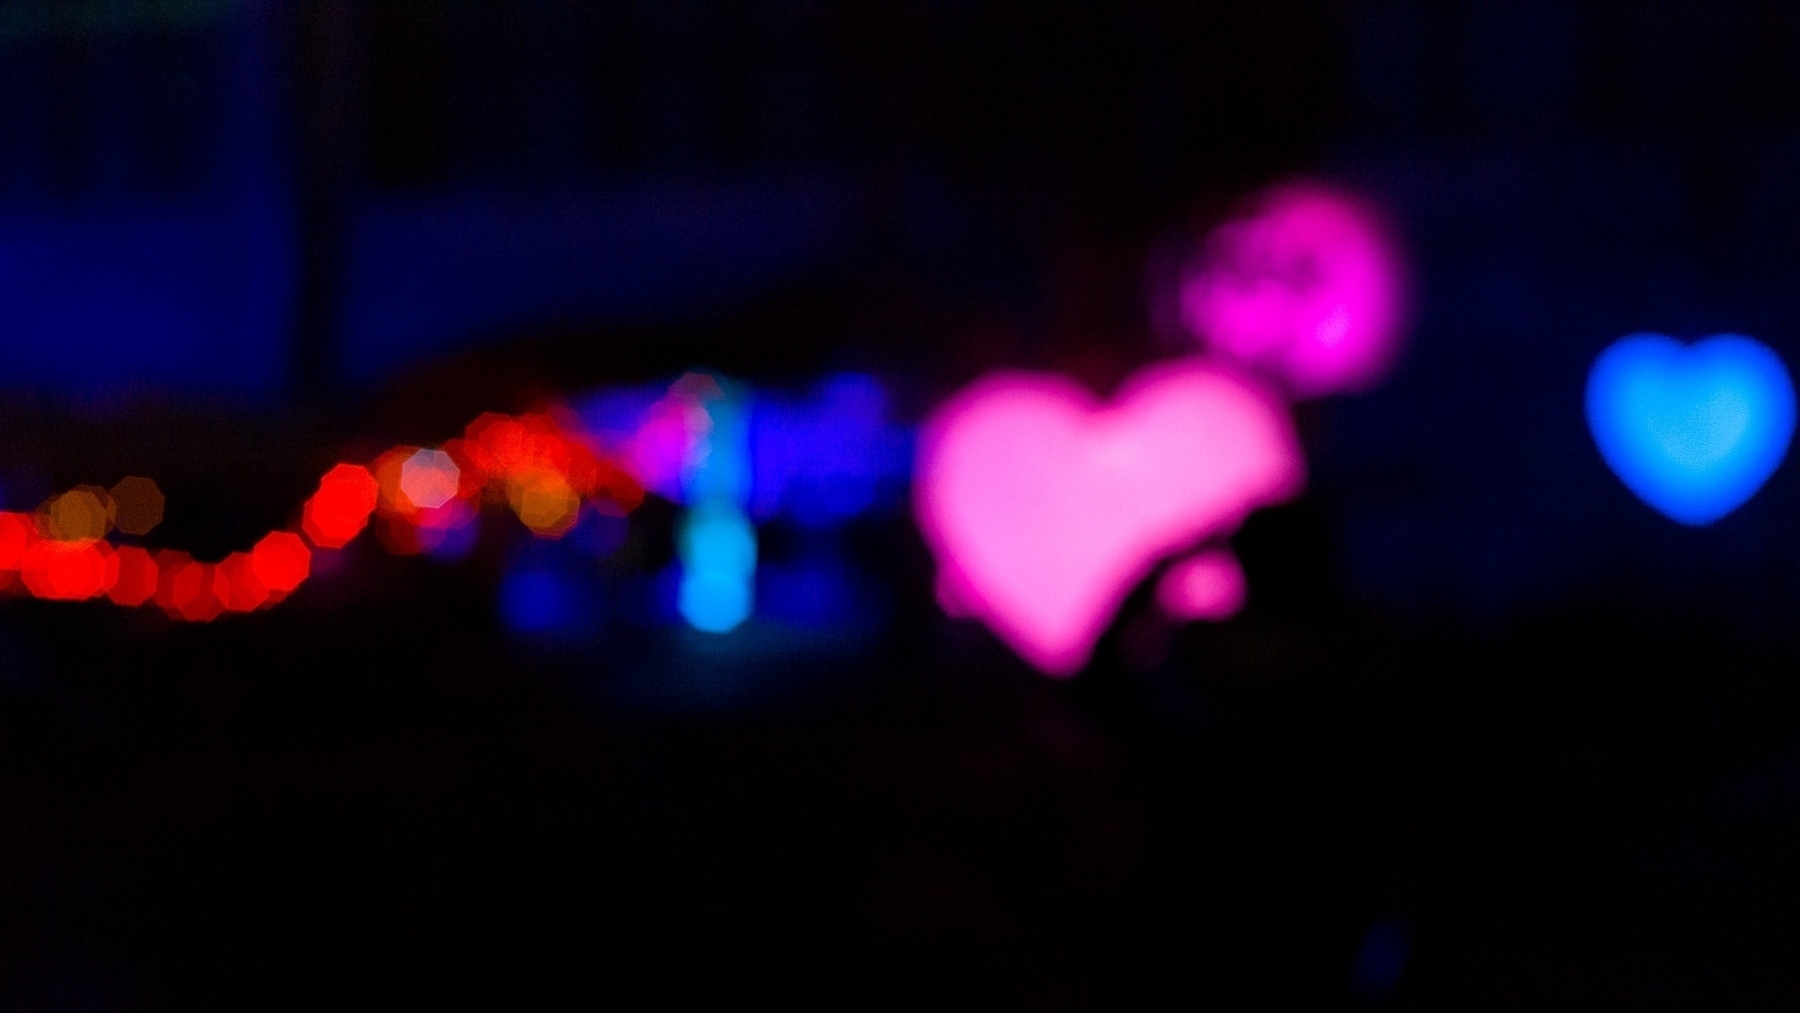 An out of focus image of blurry blobs of color and bokeh on a black background. A couple of the blobs resemble heart shapes.